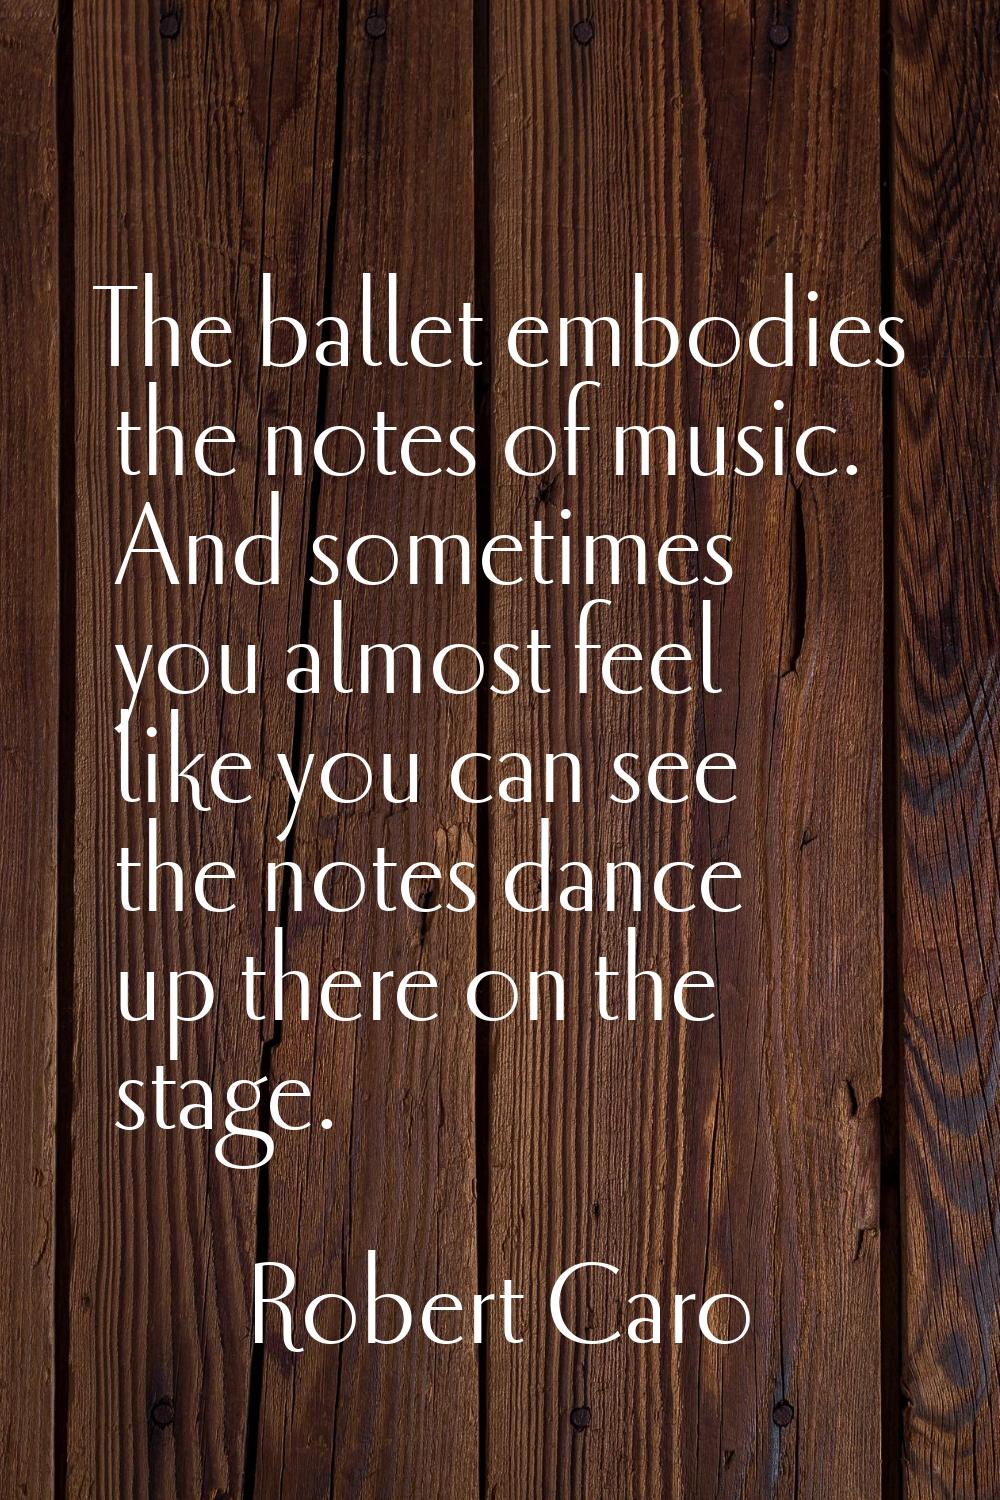 The ballet embodies the notes of music. And sometimes you almost feel like you can see the notes da